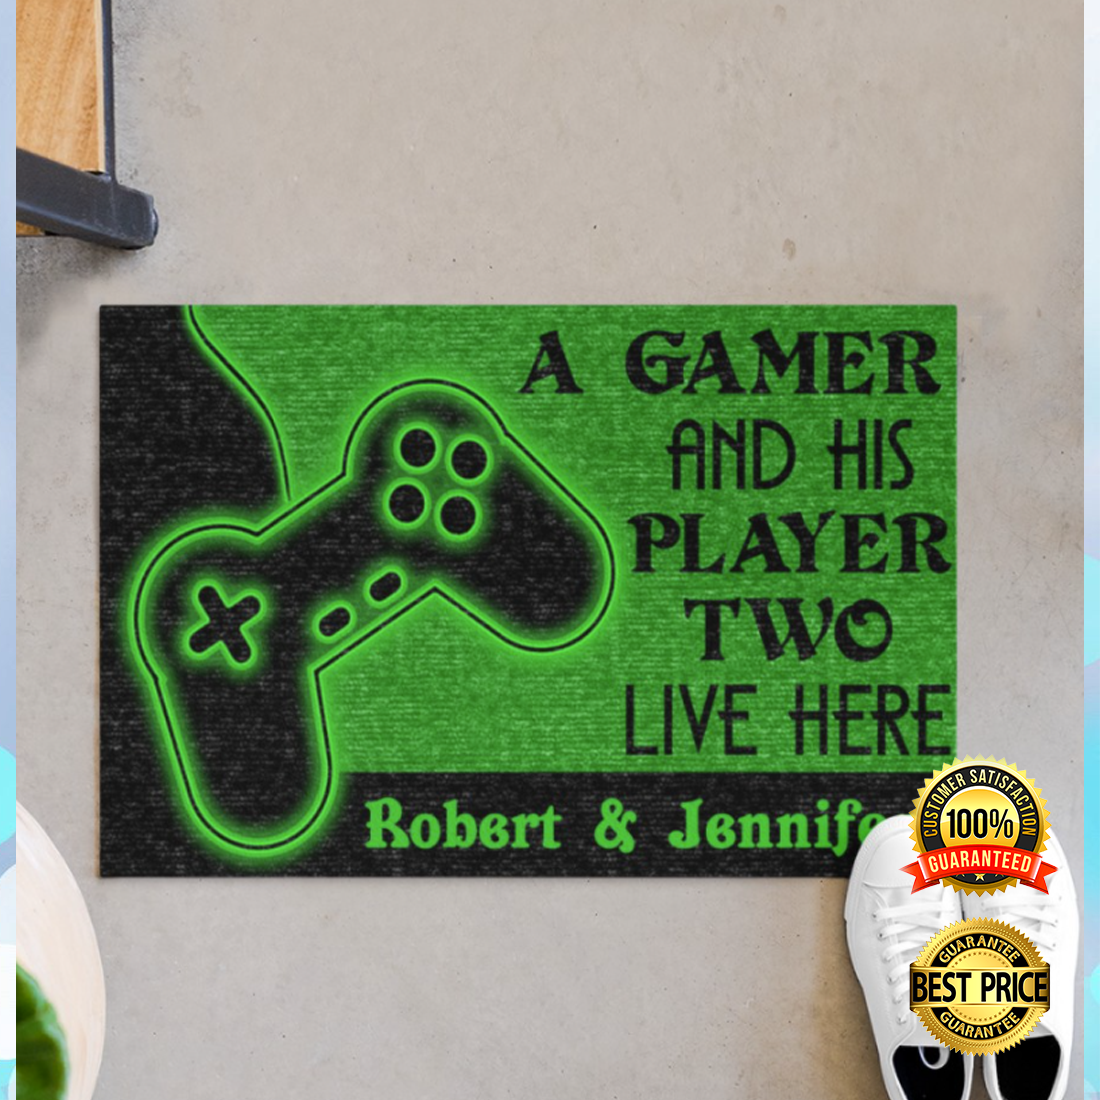 PERRSONALIZED A GAMER AND HIS PLAYER TWO LIVE HERE DOORMAT 3